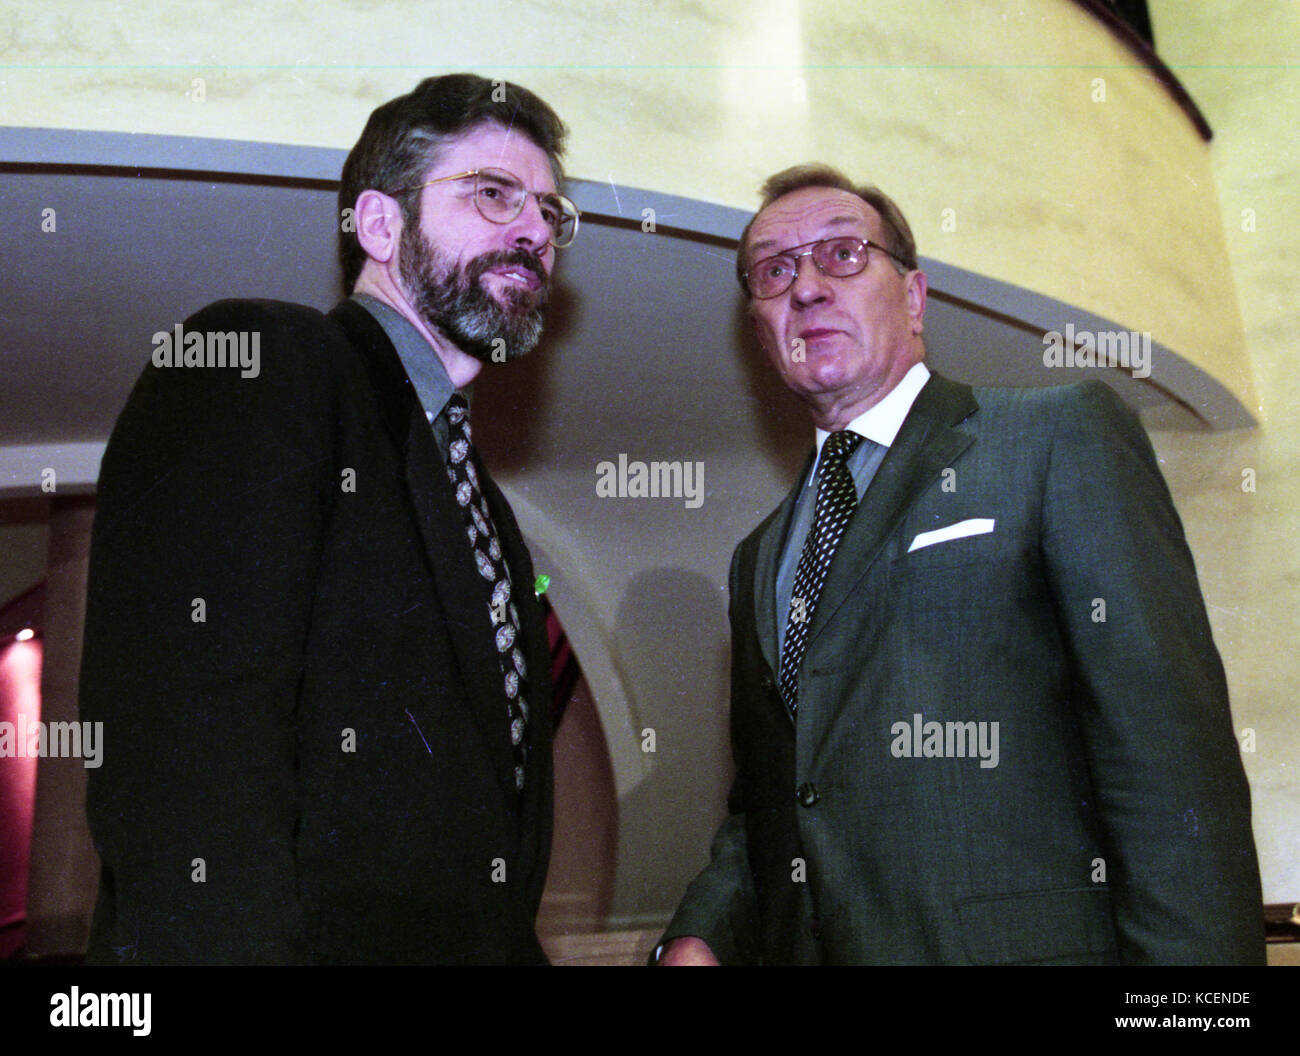 Harri Hermanni Holkeri KBE was a Finnish statesman chats with Sinn Fein's Gerry Adams before a meeting in Belfast during the Good Friday Agreement Talks. Harri Hermanni Holkeri KBE was a Finnish statesman representing the National Coalition Party of Finland (Kokoomus / Samlingspartiet). He was the Prime Minister of Finland 1987–1991, speaker of the UN General Assembly 2000–2001 and headed the United Nations Interim Administration Mission in Kosovo from 2003- 2004. He chaired the United Nations General Assembly, 2000–2001. He also played a constructive role in securing the Good Friday Agreement Stock Photo